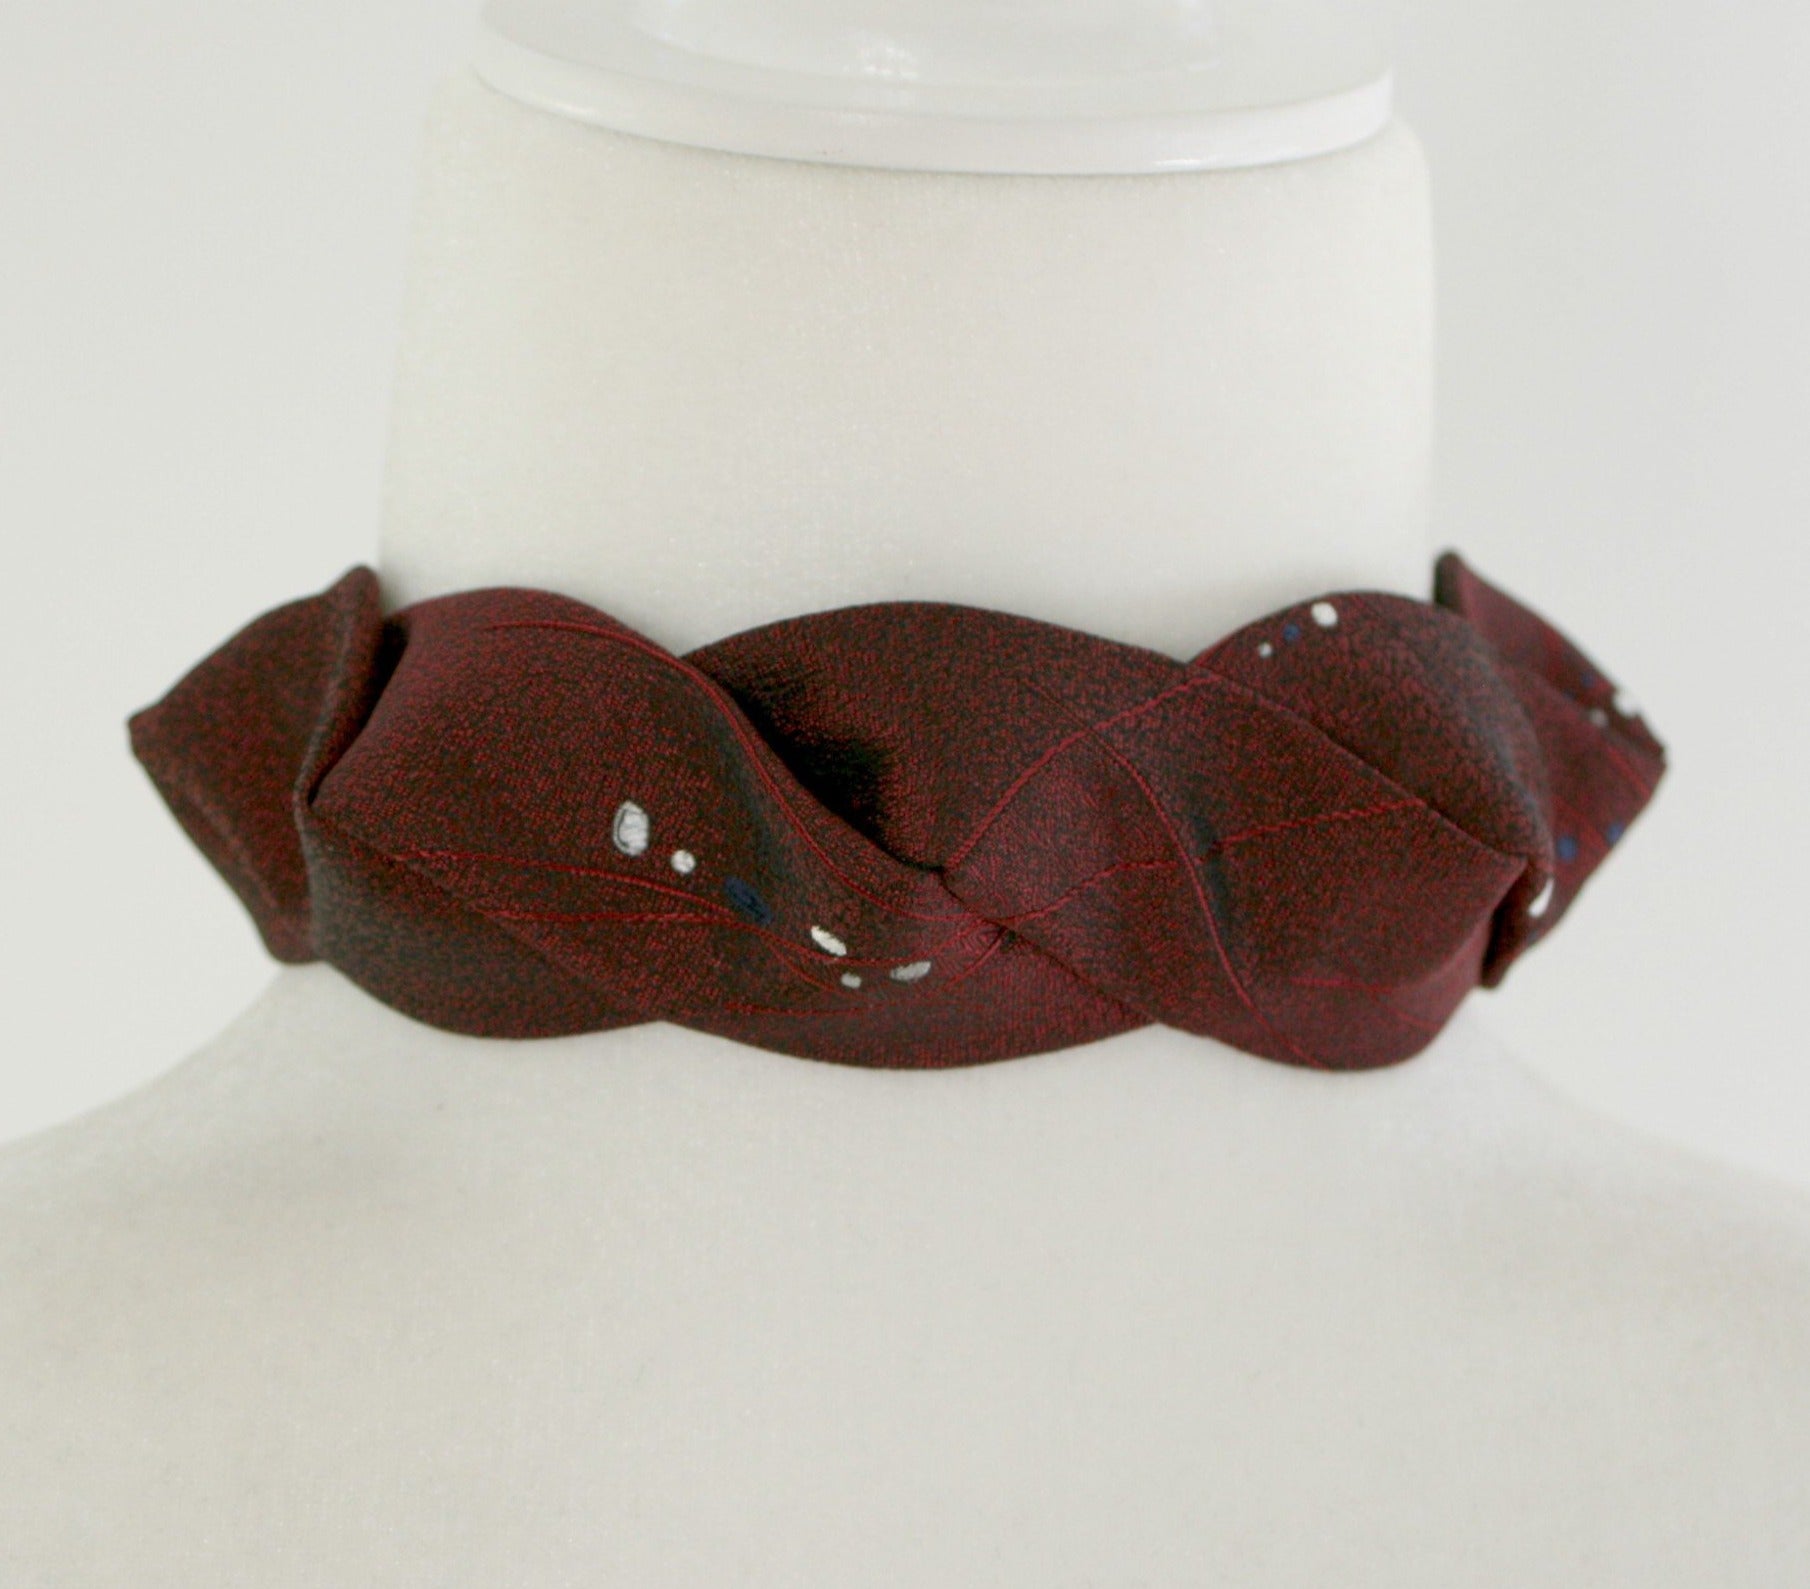 wine choker made from vintage tie